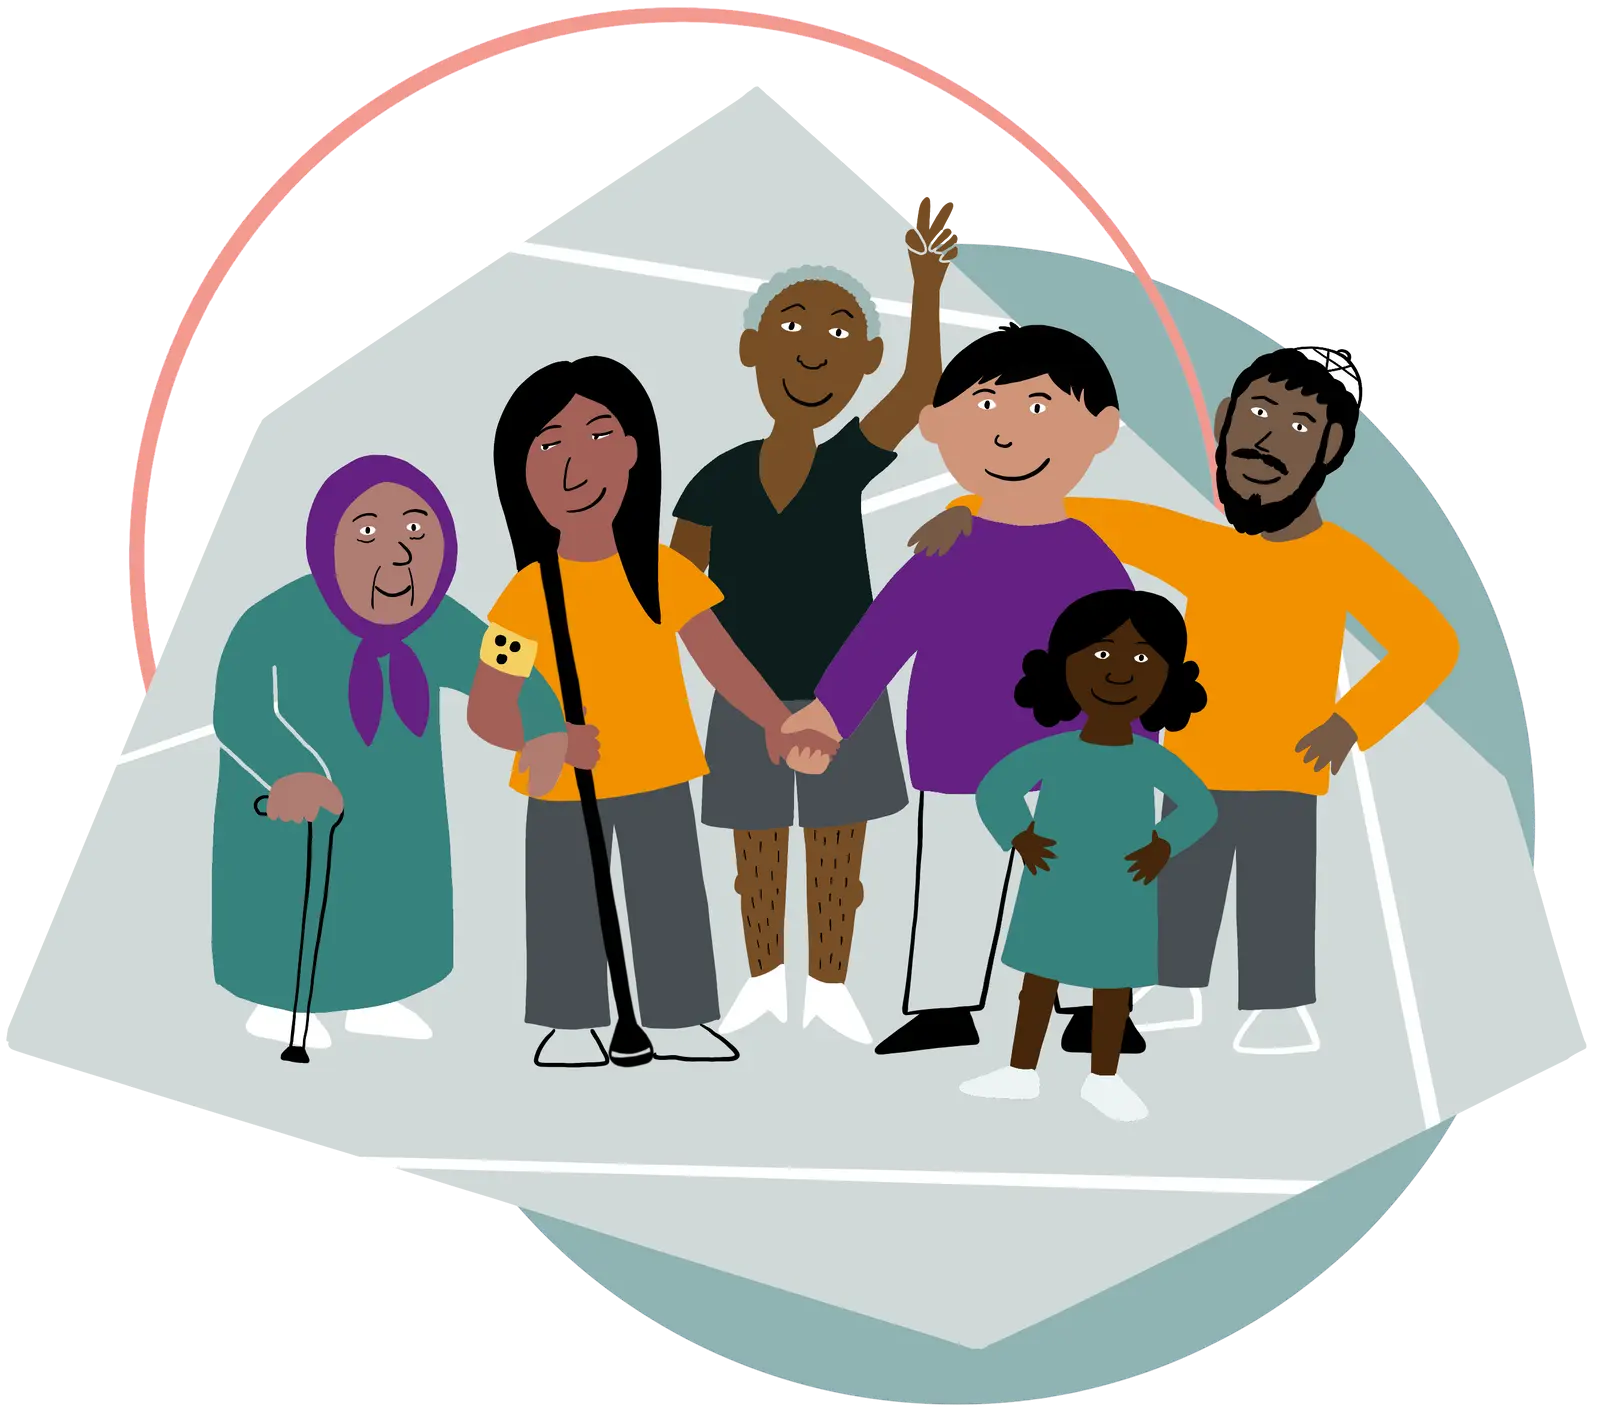 The illustration depicts a group of people from different ethnic backgrounds in front of various colorful and geometric shapes, sticking together and looking very open and friendly.